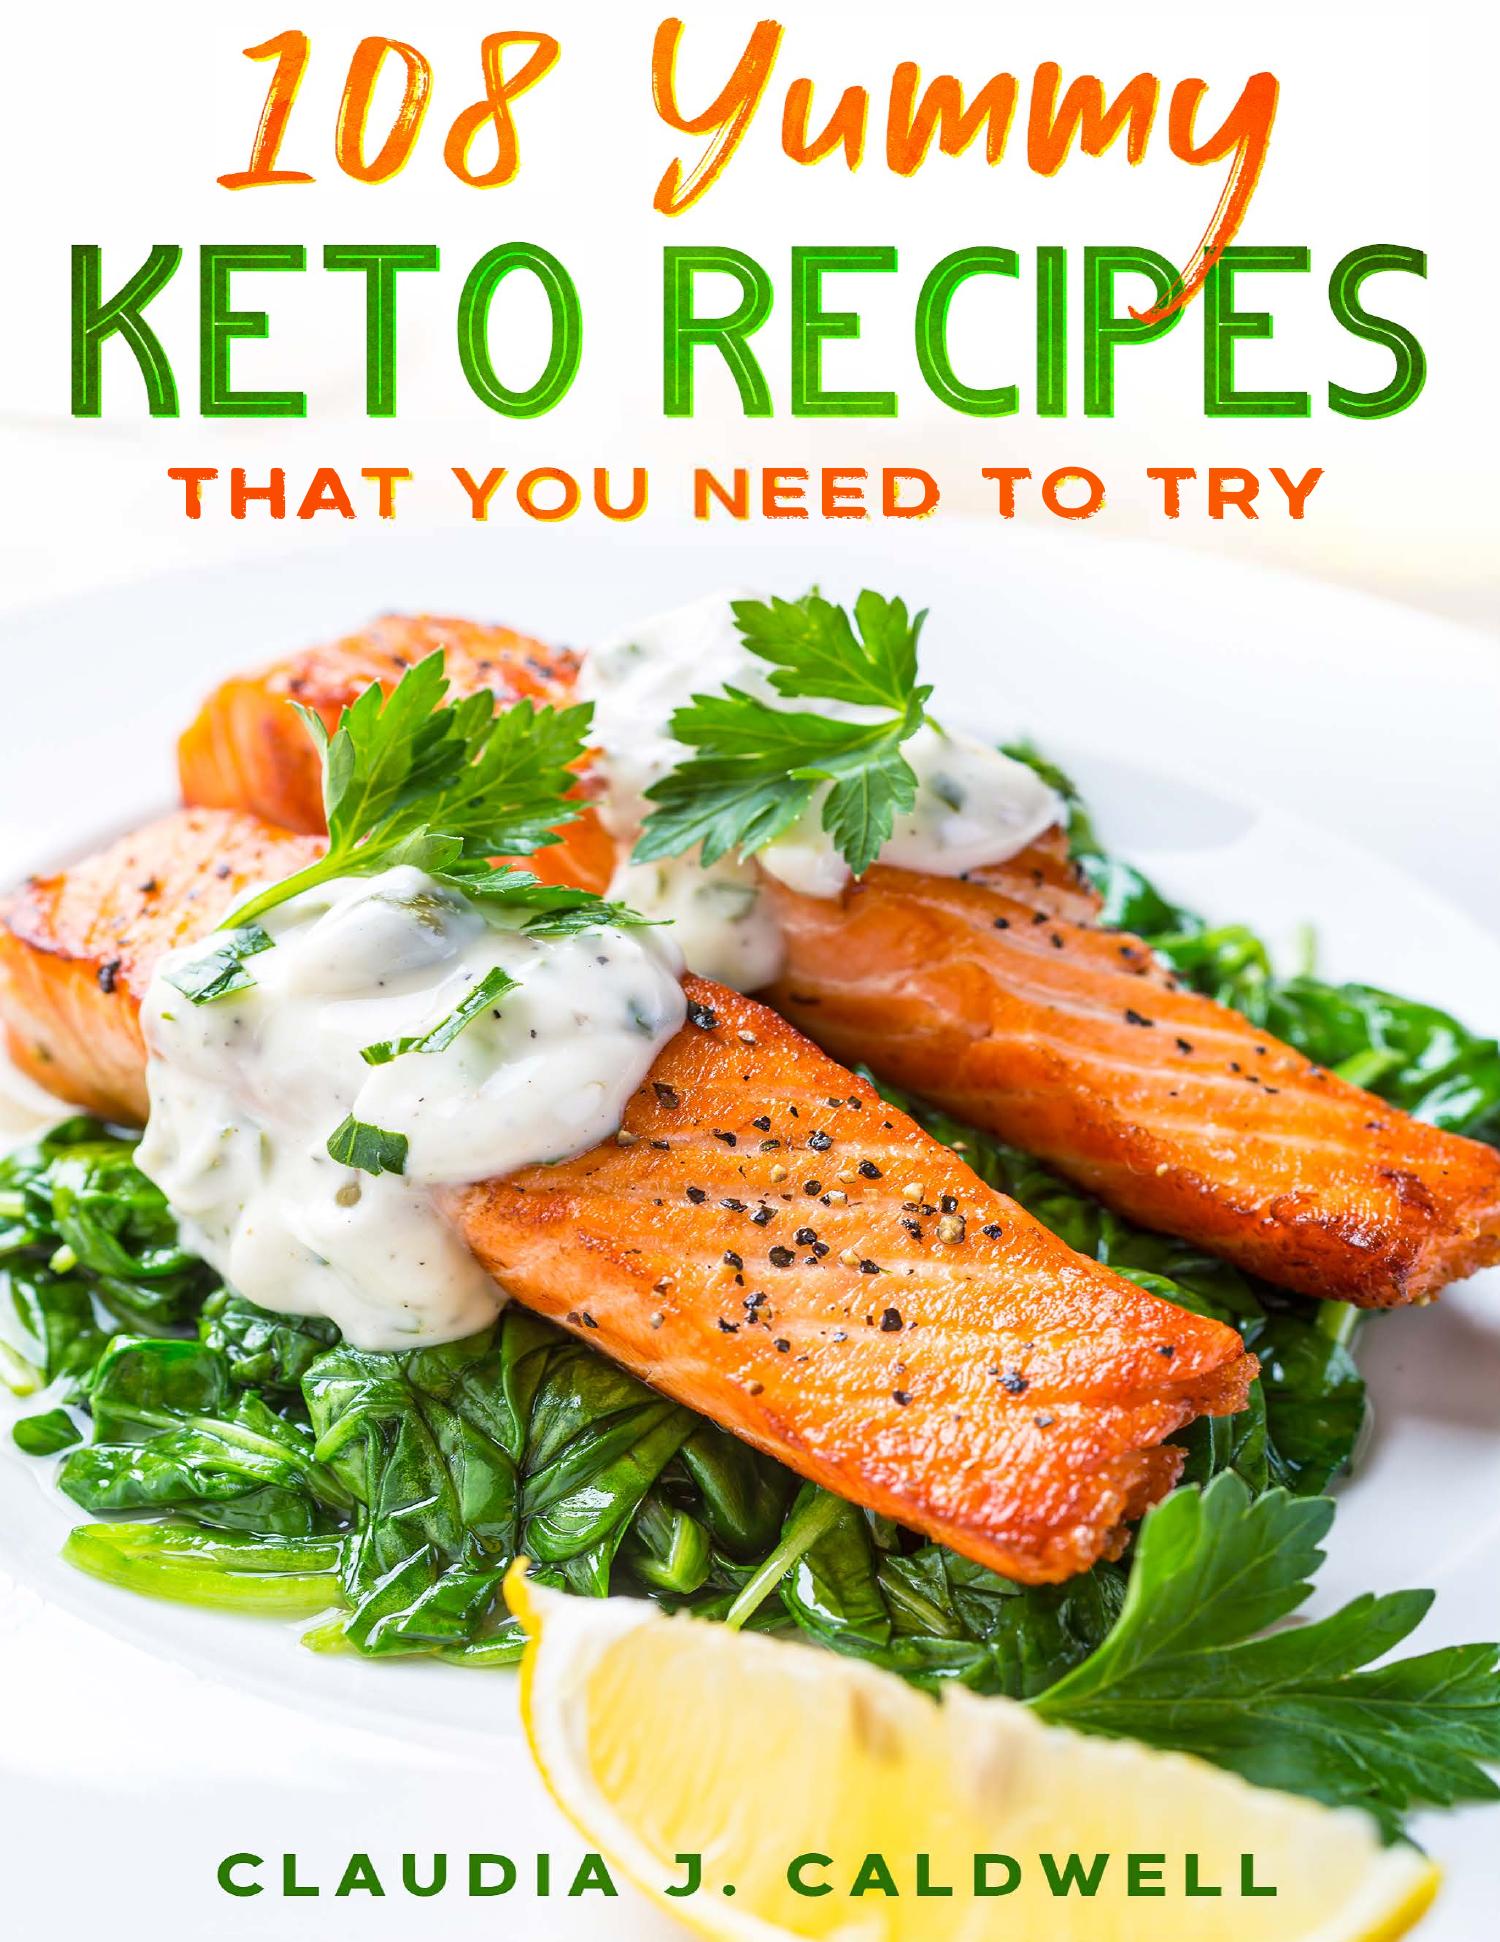 108 Yummy Keto Recipes That You Need To Try.pdf | DocDroid